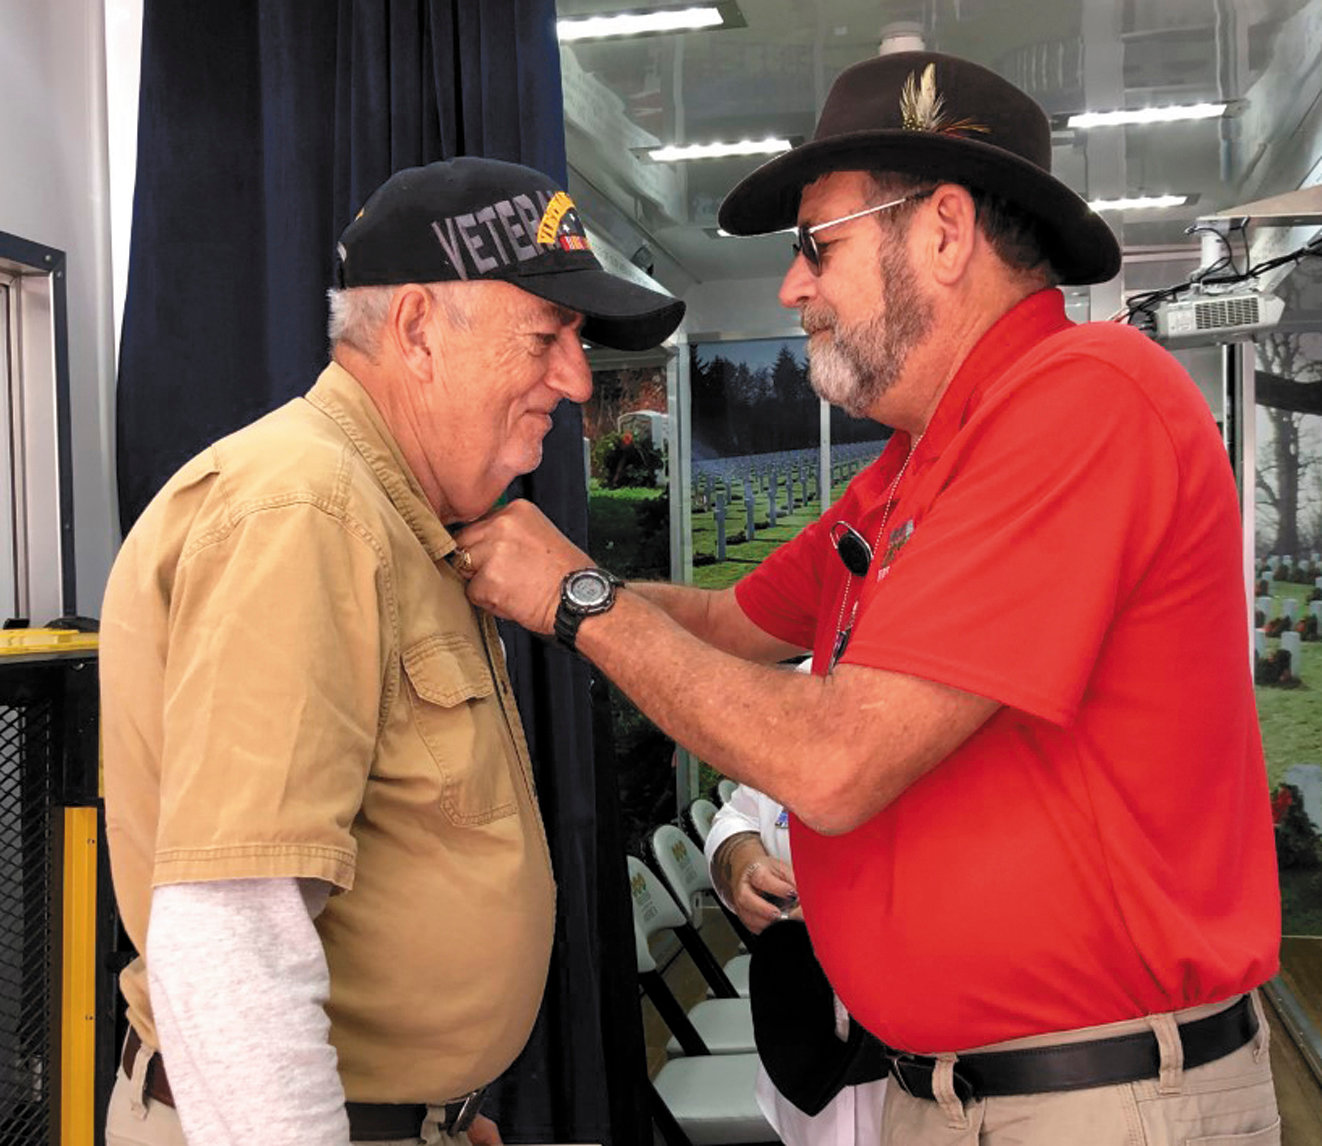 Gary Leverette, a local Vietnam veteran, was surprised with several honors as he visited the exhibit. Andy Tatum of Wreaths Across America presents Leverette a sdpecial pin awarded to visiting veterans and thanks him for his service. “We weren’t always thanked when we returned from Vietnam,” Leverette remarked.